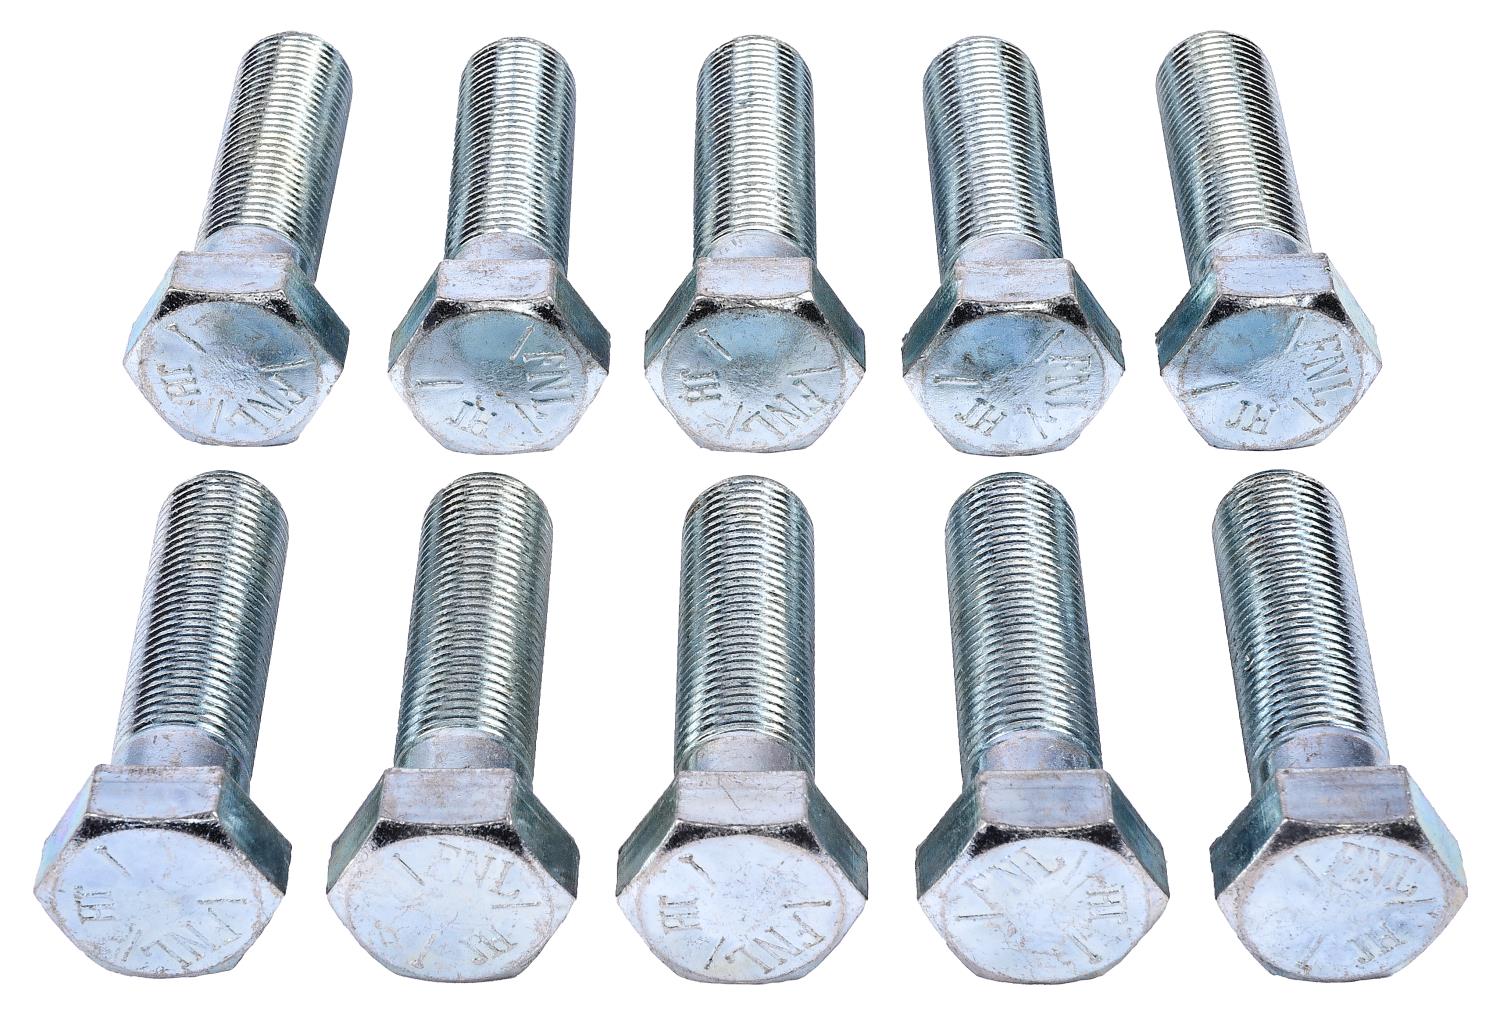 Hex Head Bolts, 5/8 in.-18 x 2 1/2 in. UHL, Carbon Steel, Grade 5 [Set of 10]